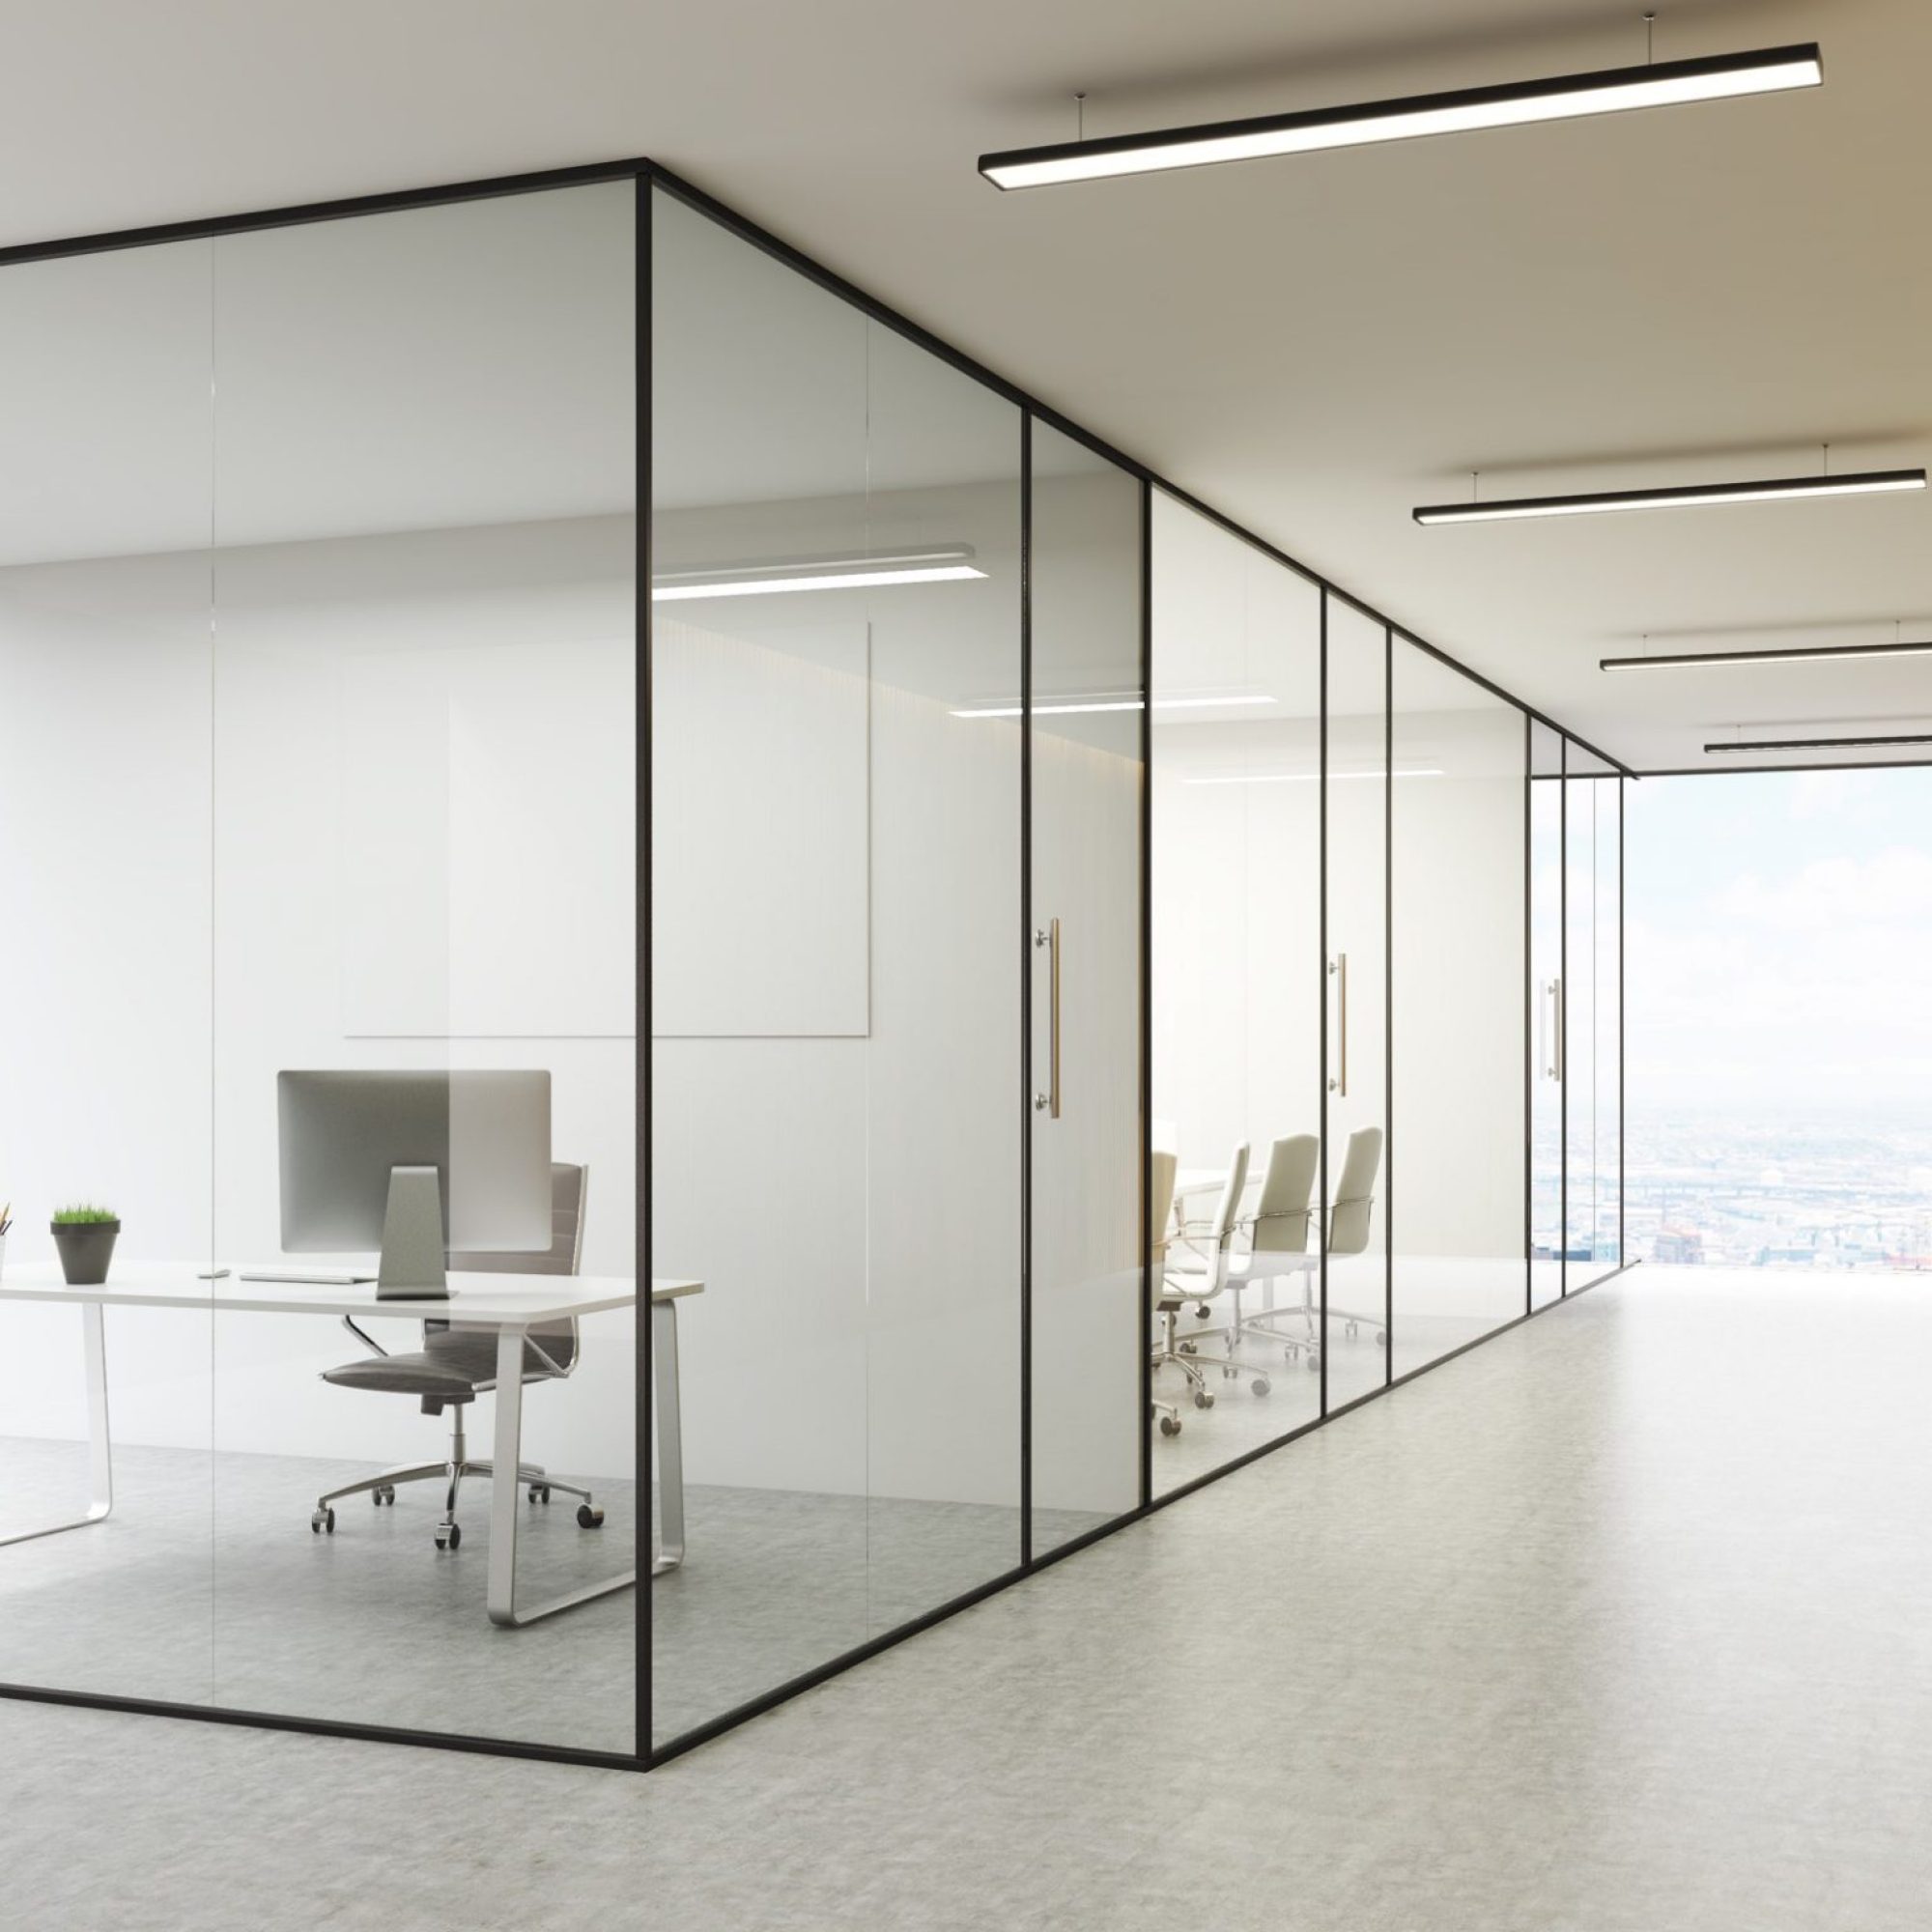 Side,View,Of,Office,Interior,With,Blank,Whiteboard,Behind,Glass